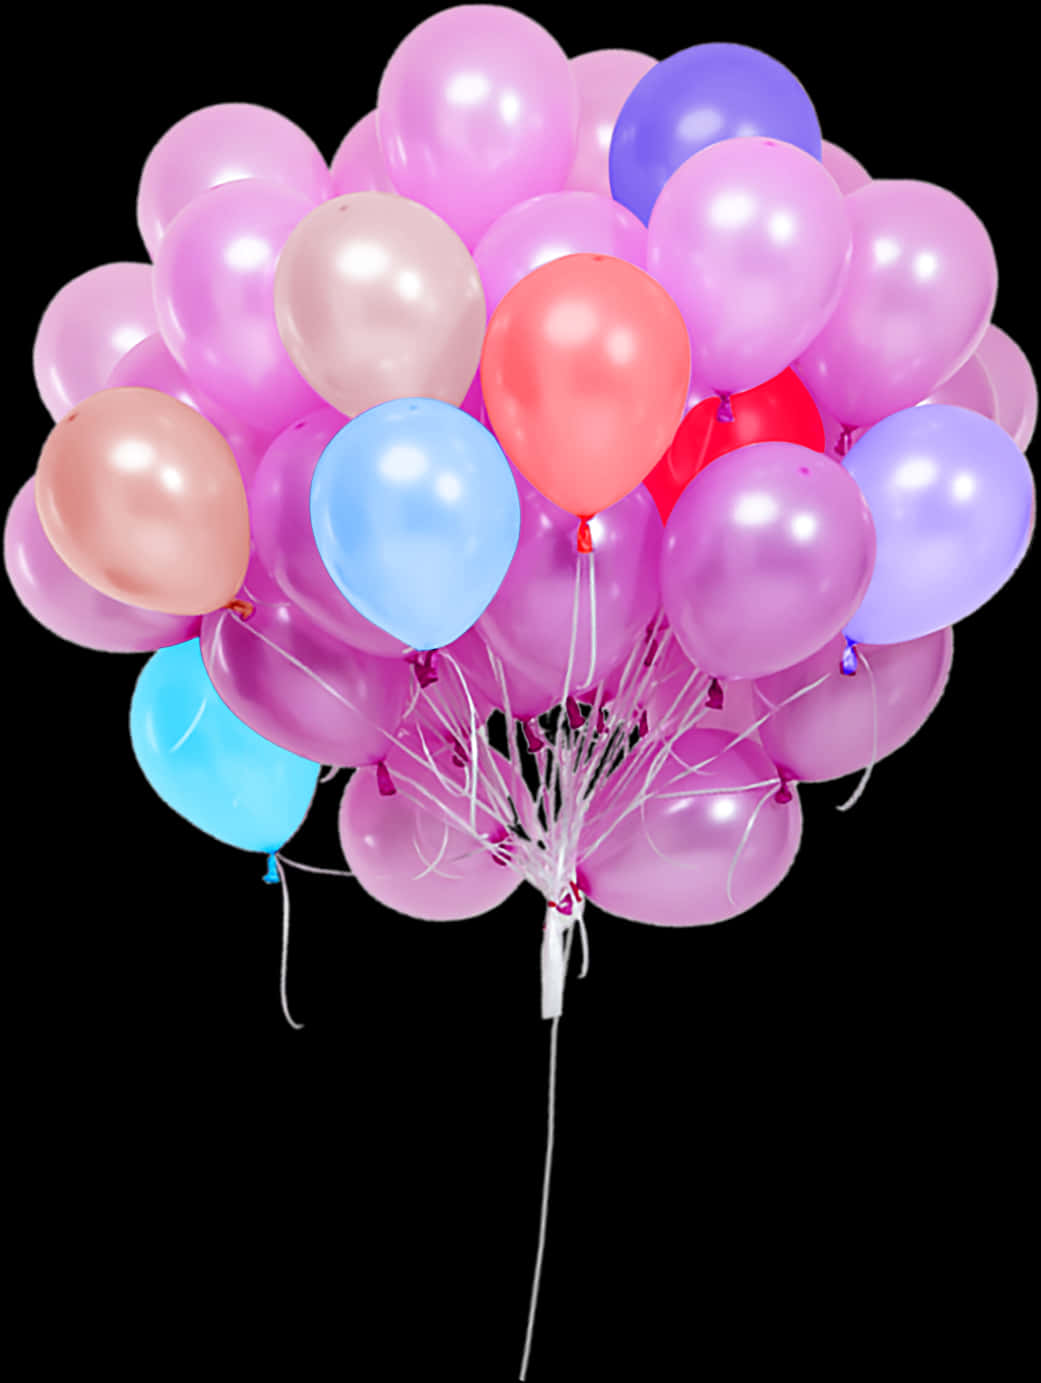 Colorful Balloons Bunch Transparent Background PNG image